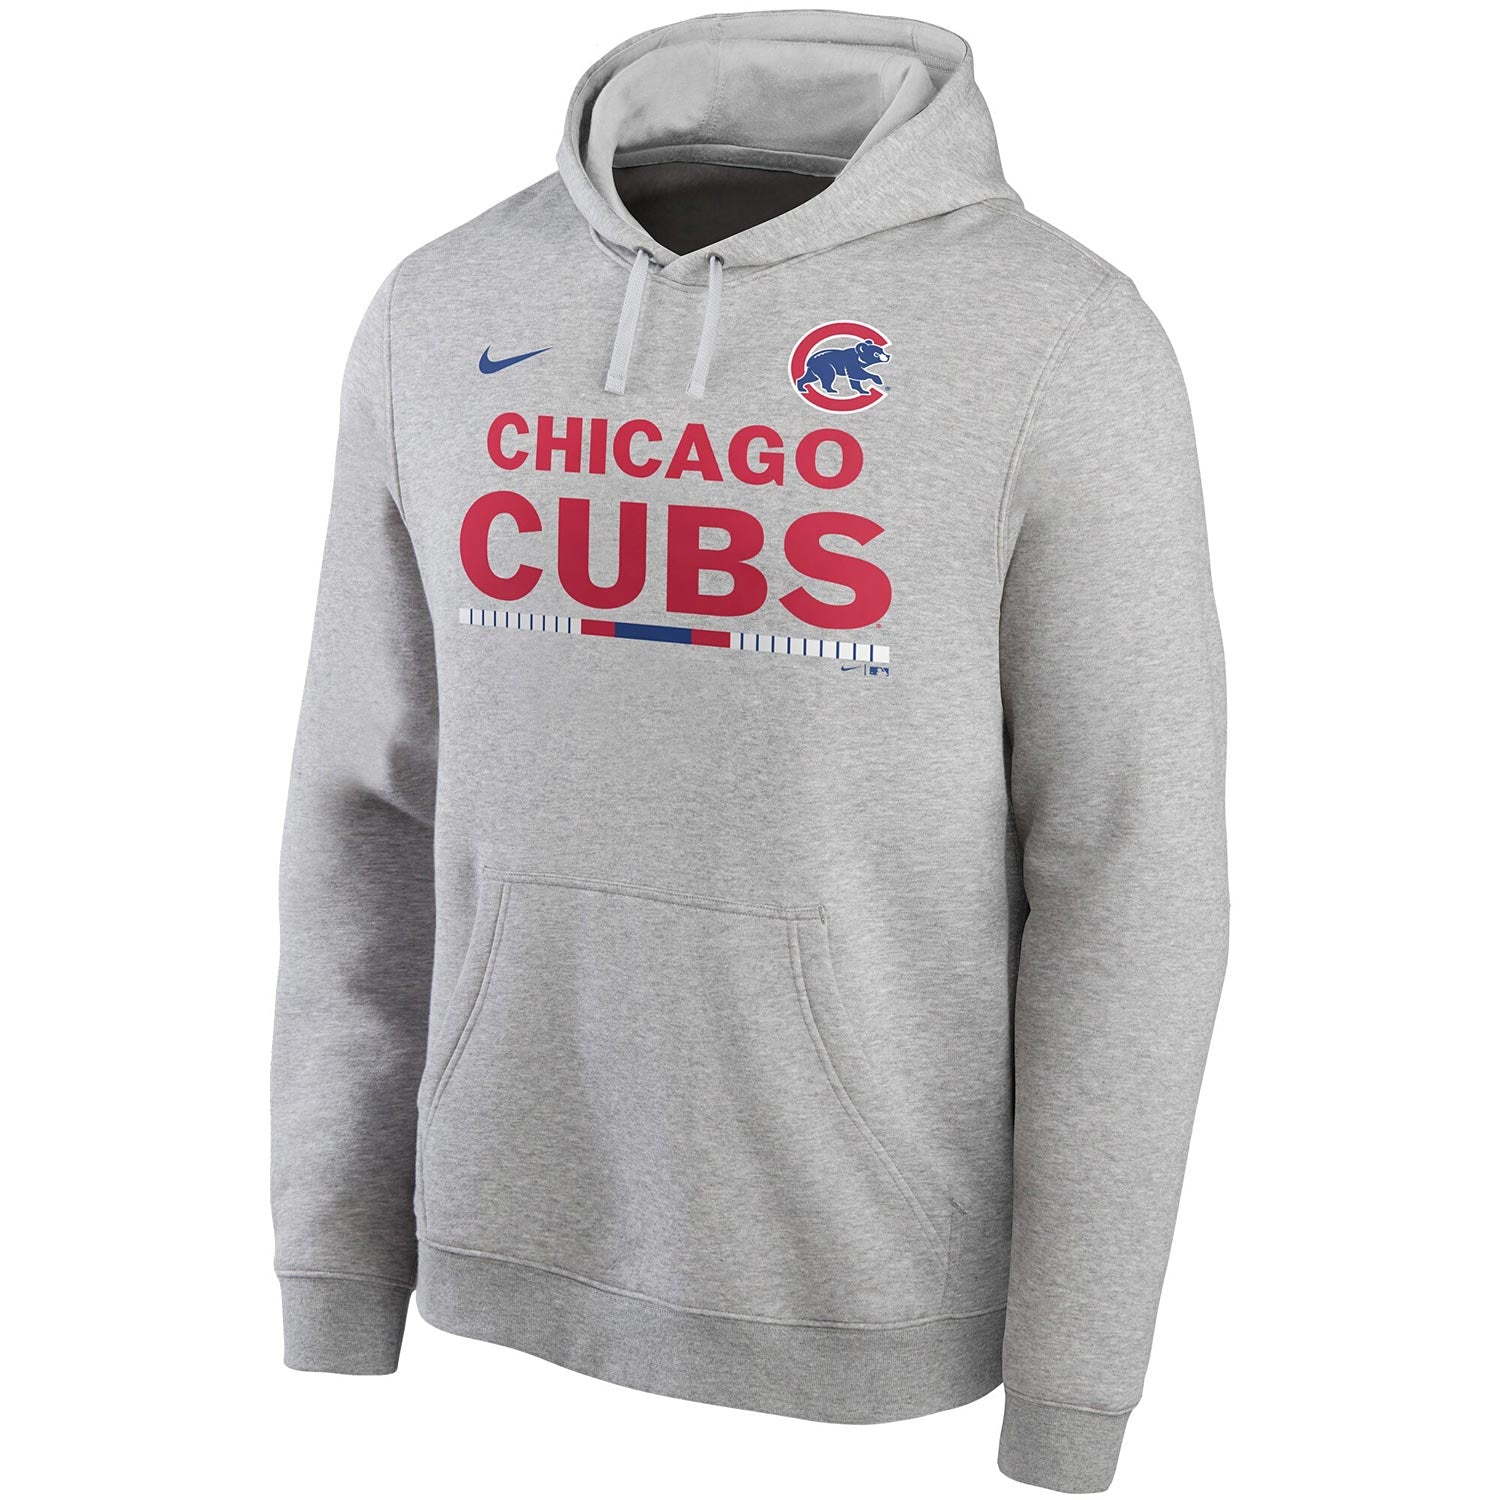 Nike Big Game (MLB Chicago Cubs) Women's Pullover Hoodie.